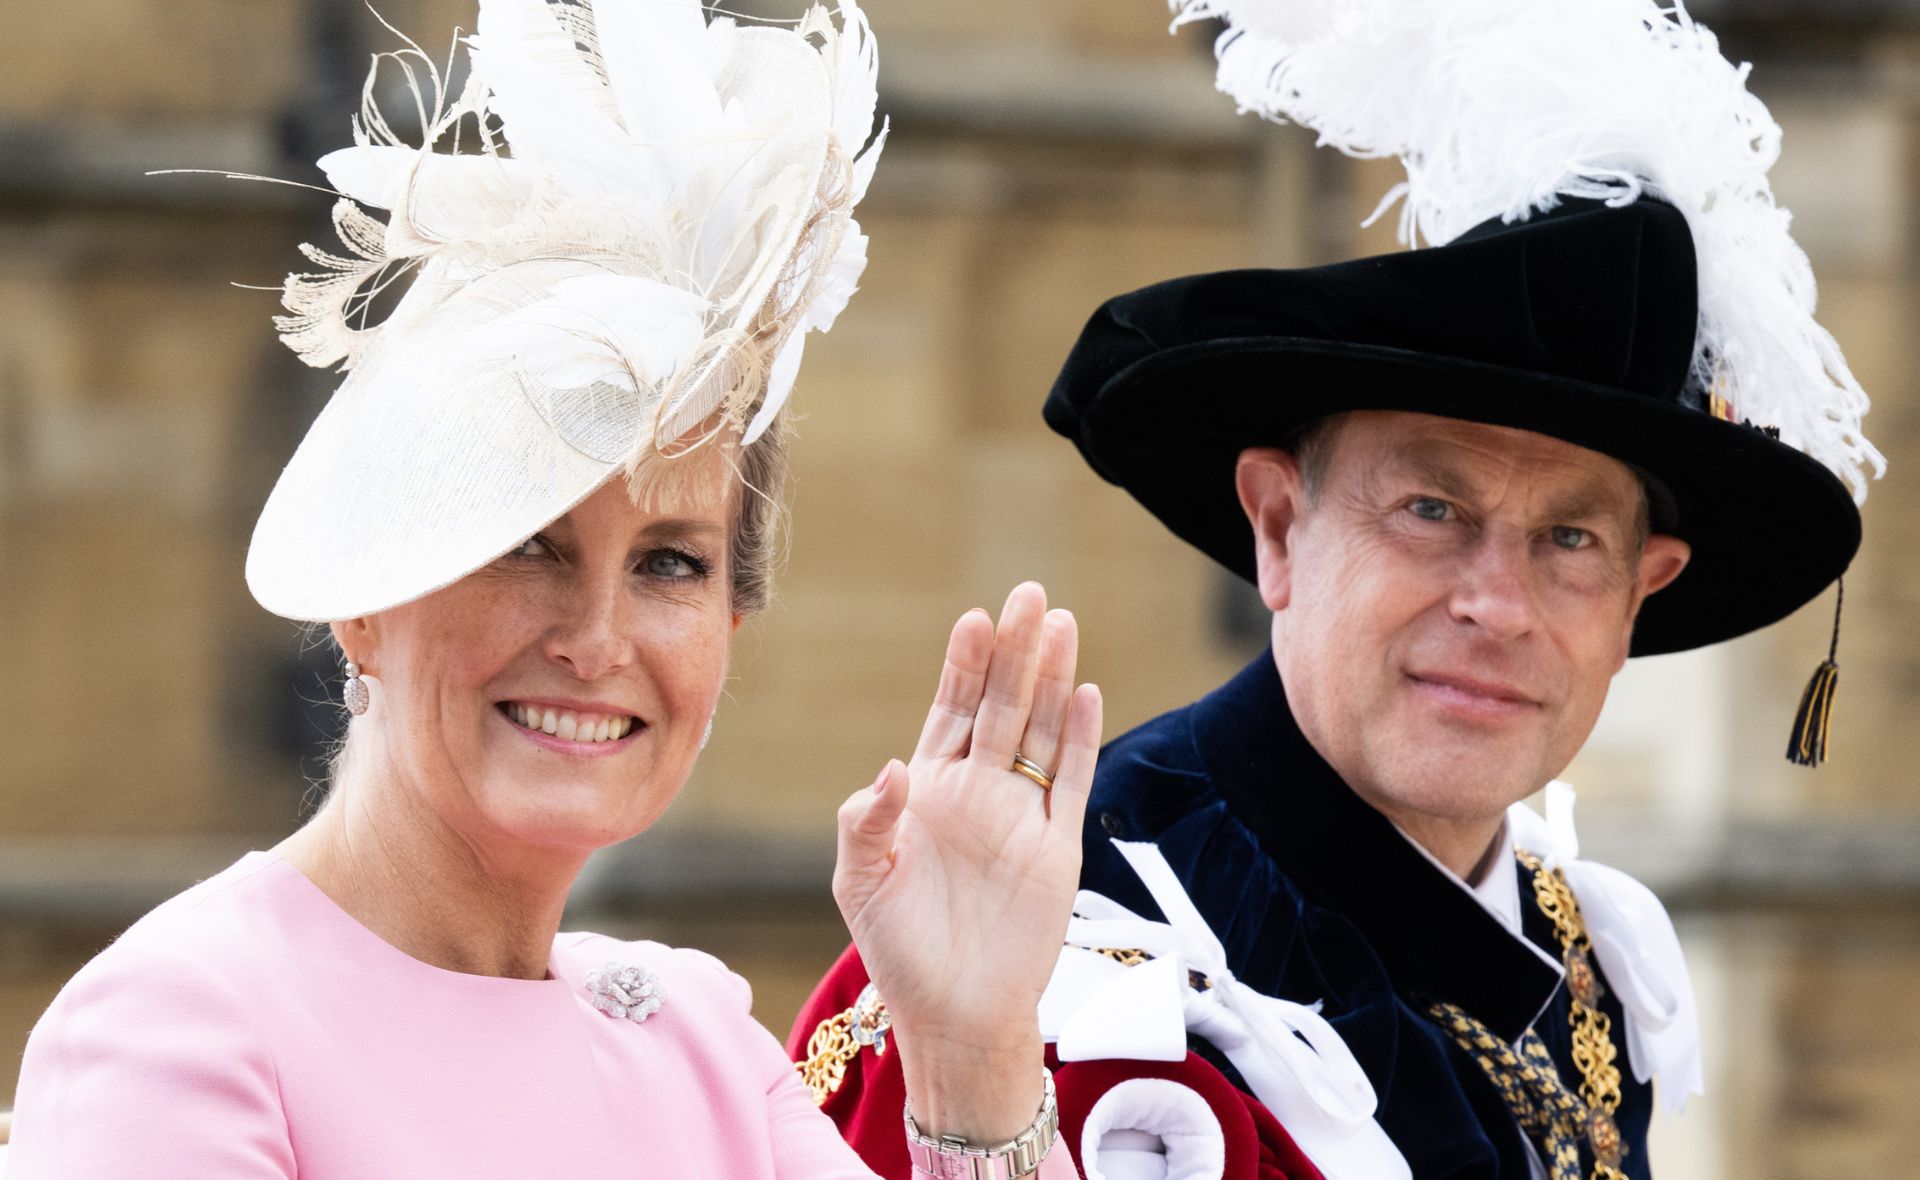 Prince Edward and Countess Sophie have new royal titles